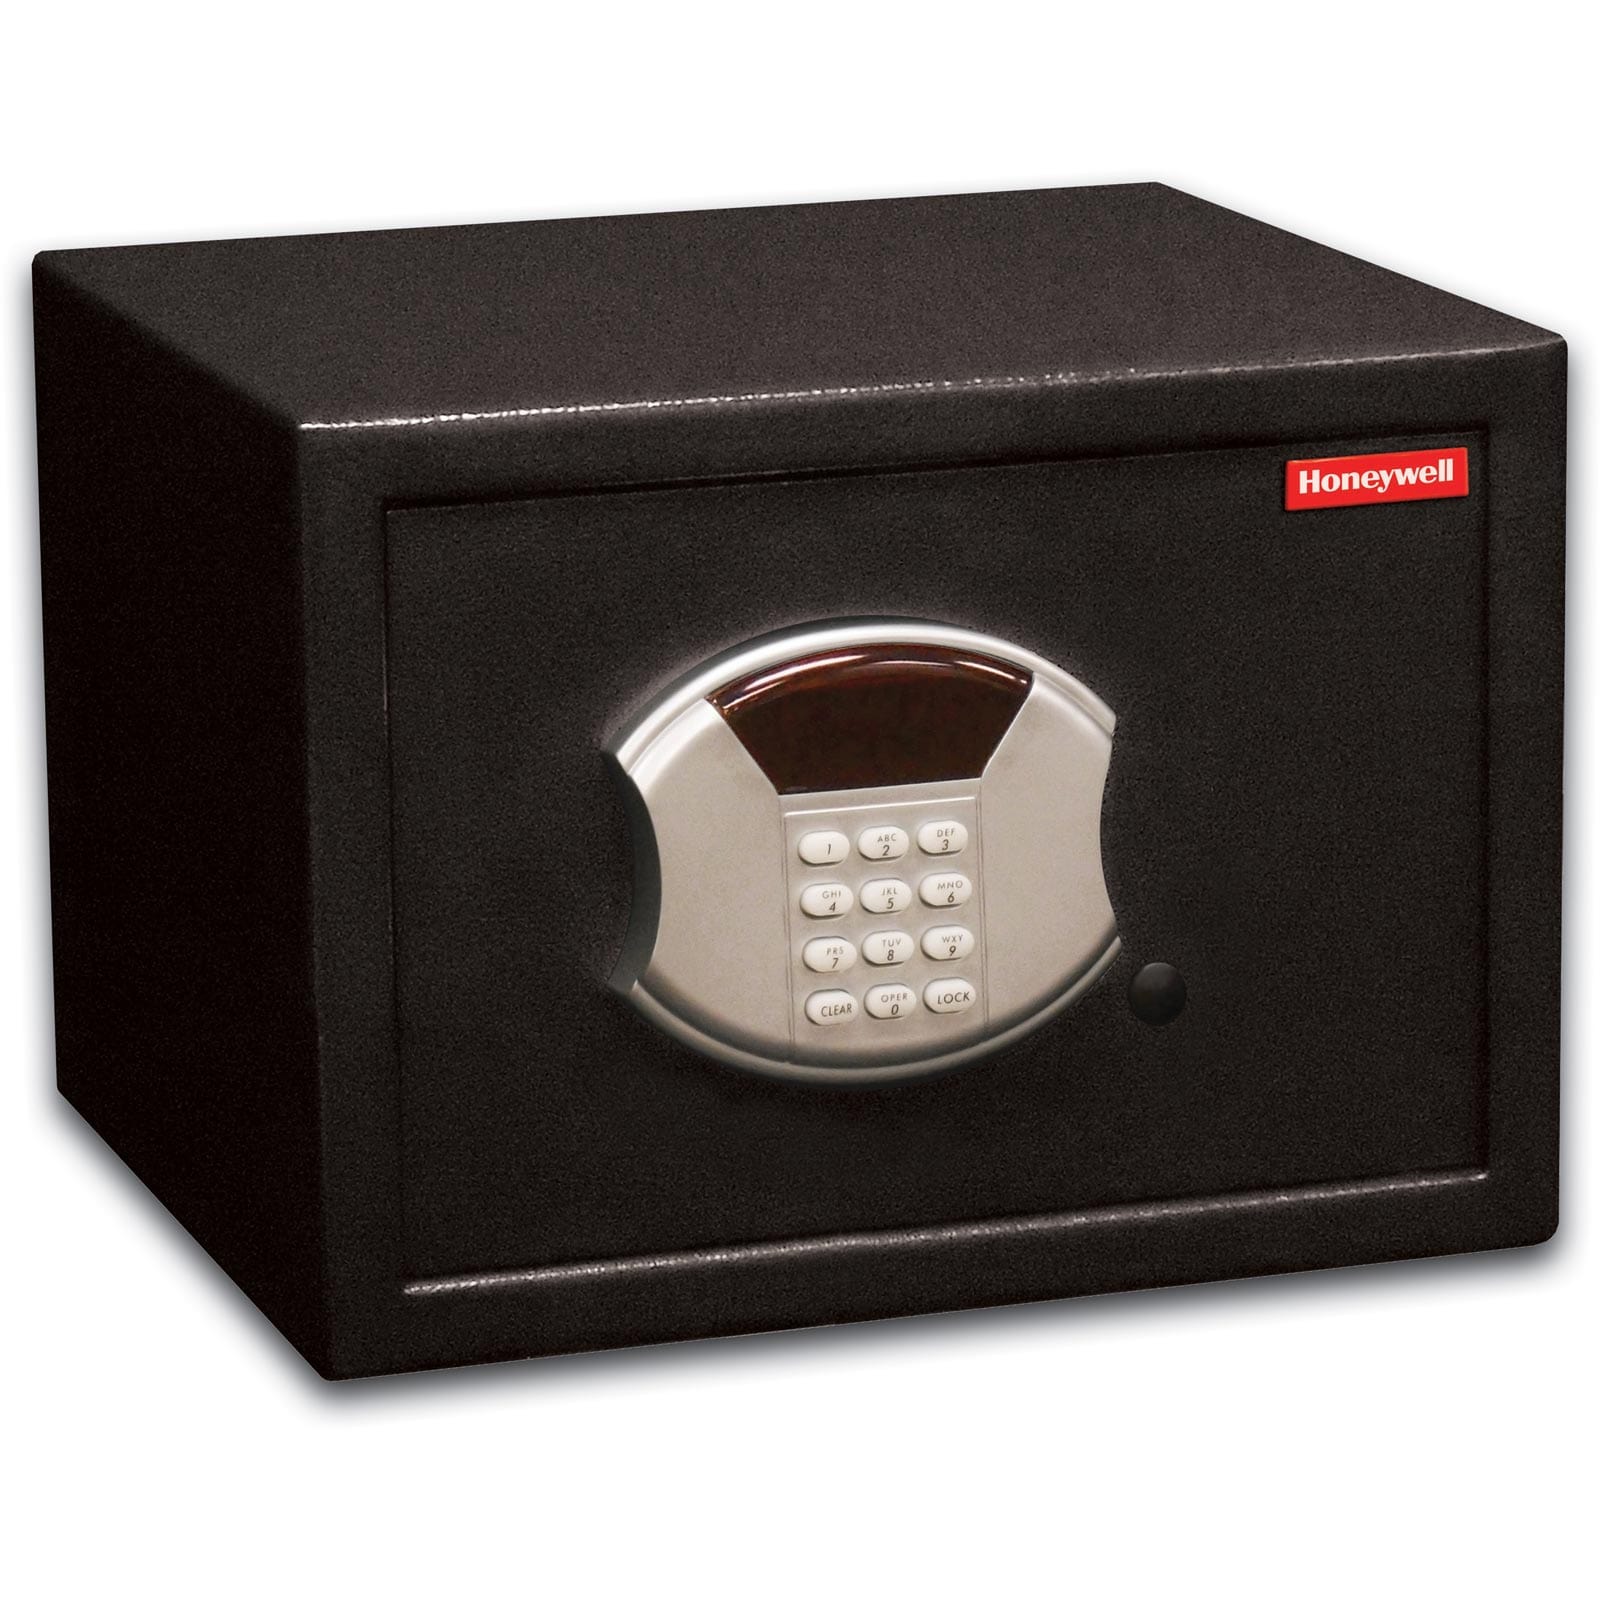 Buy Honeywell Digital Mid-Size Steel Security Safe (0.60 cu ft.) - 5112 in Accra, Ghana | Supply Master Tool Chests & Cabinets Buy Tools hardware Building materials